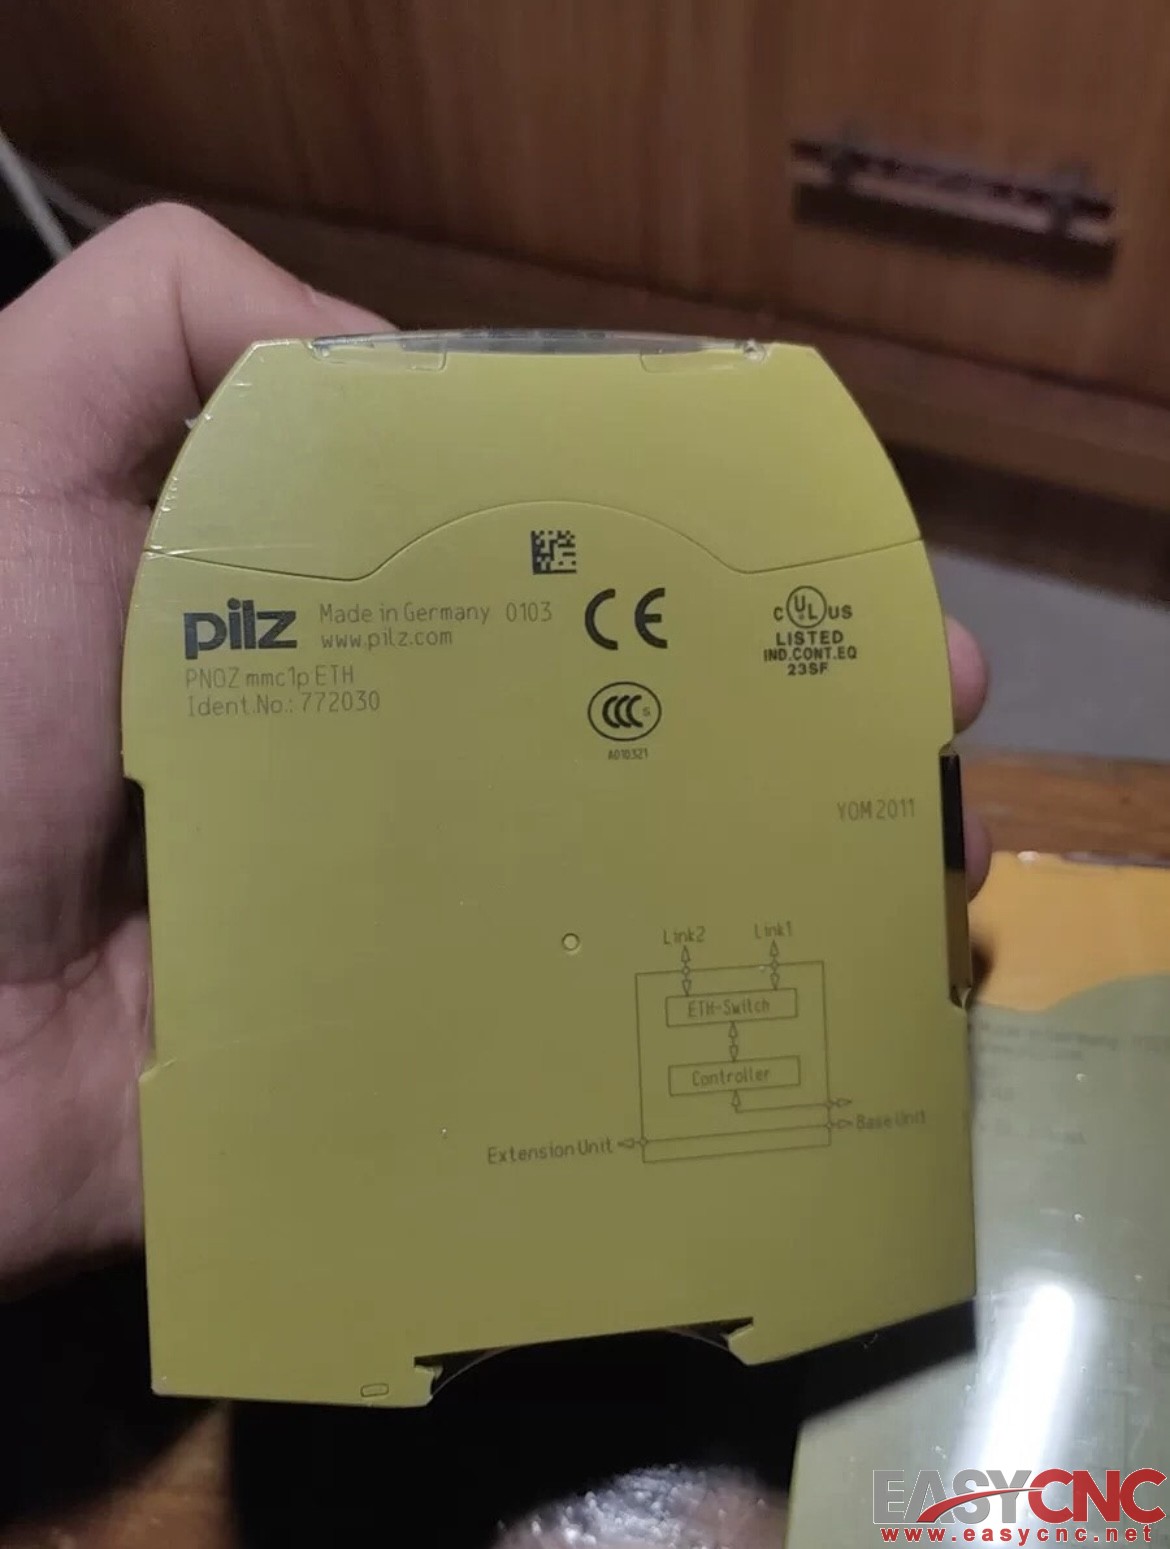 772030 PNOZ mmc 1p ETH Pilz Safety Relay New And Original